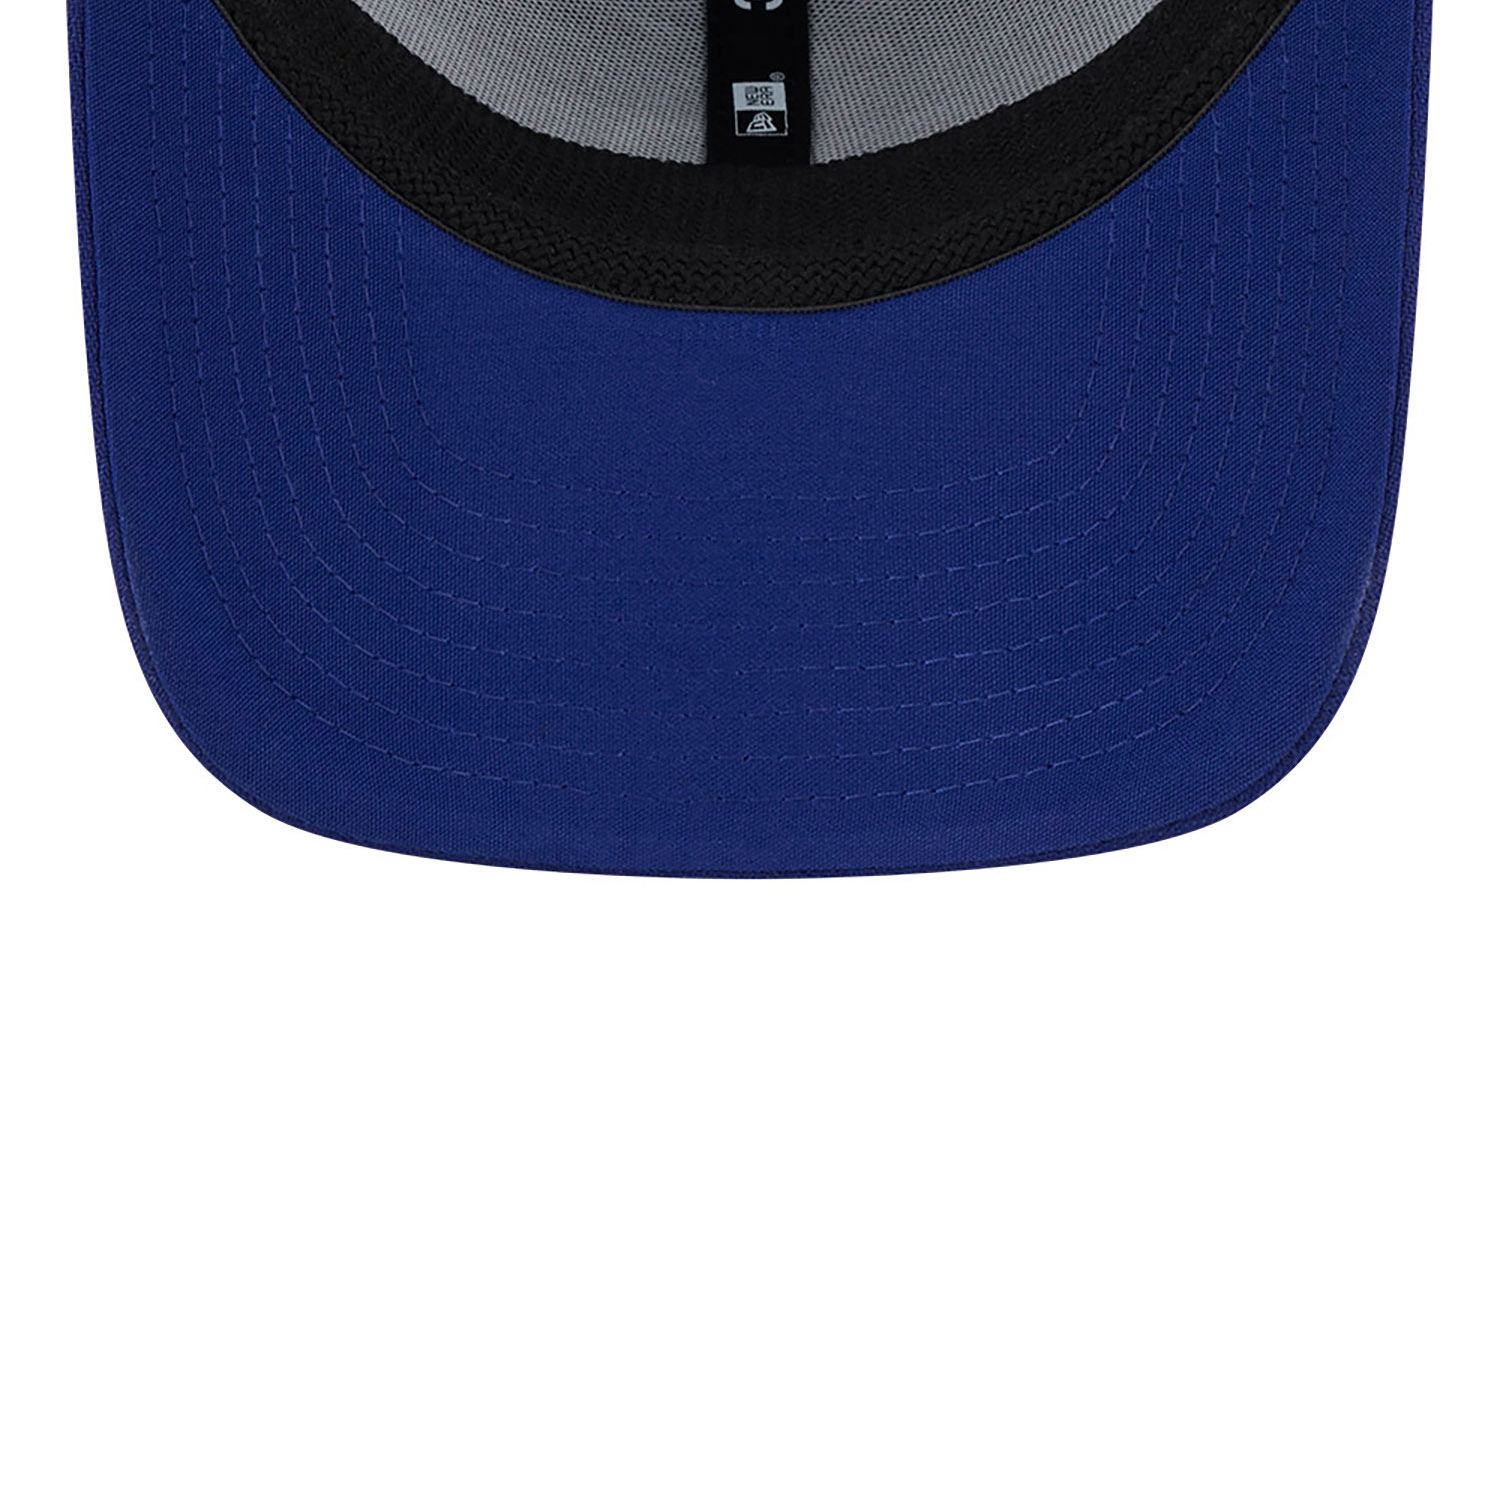 Inland Empire 66Ers MiLB Theme Nights Blue 39THIRTY Stretch Fit Cap